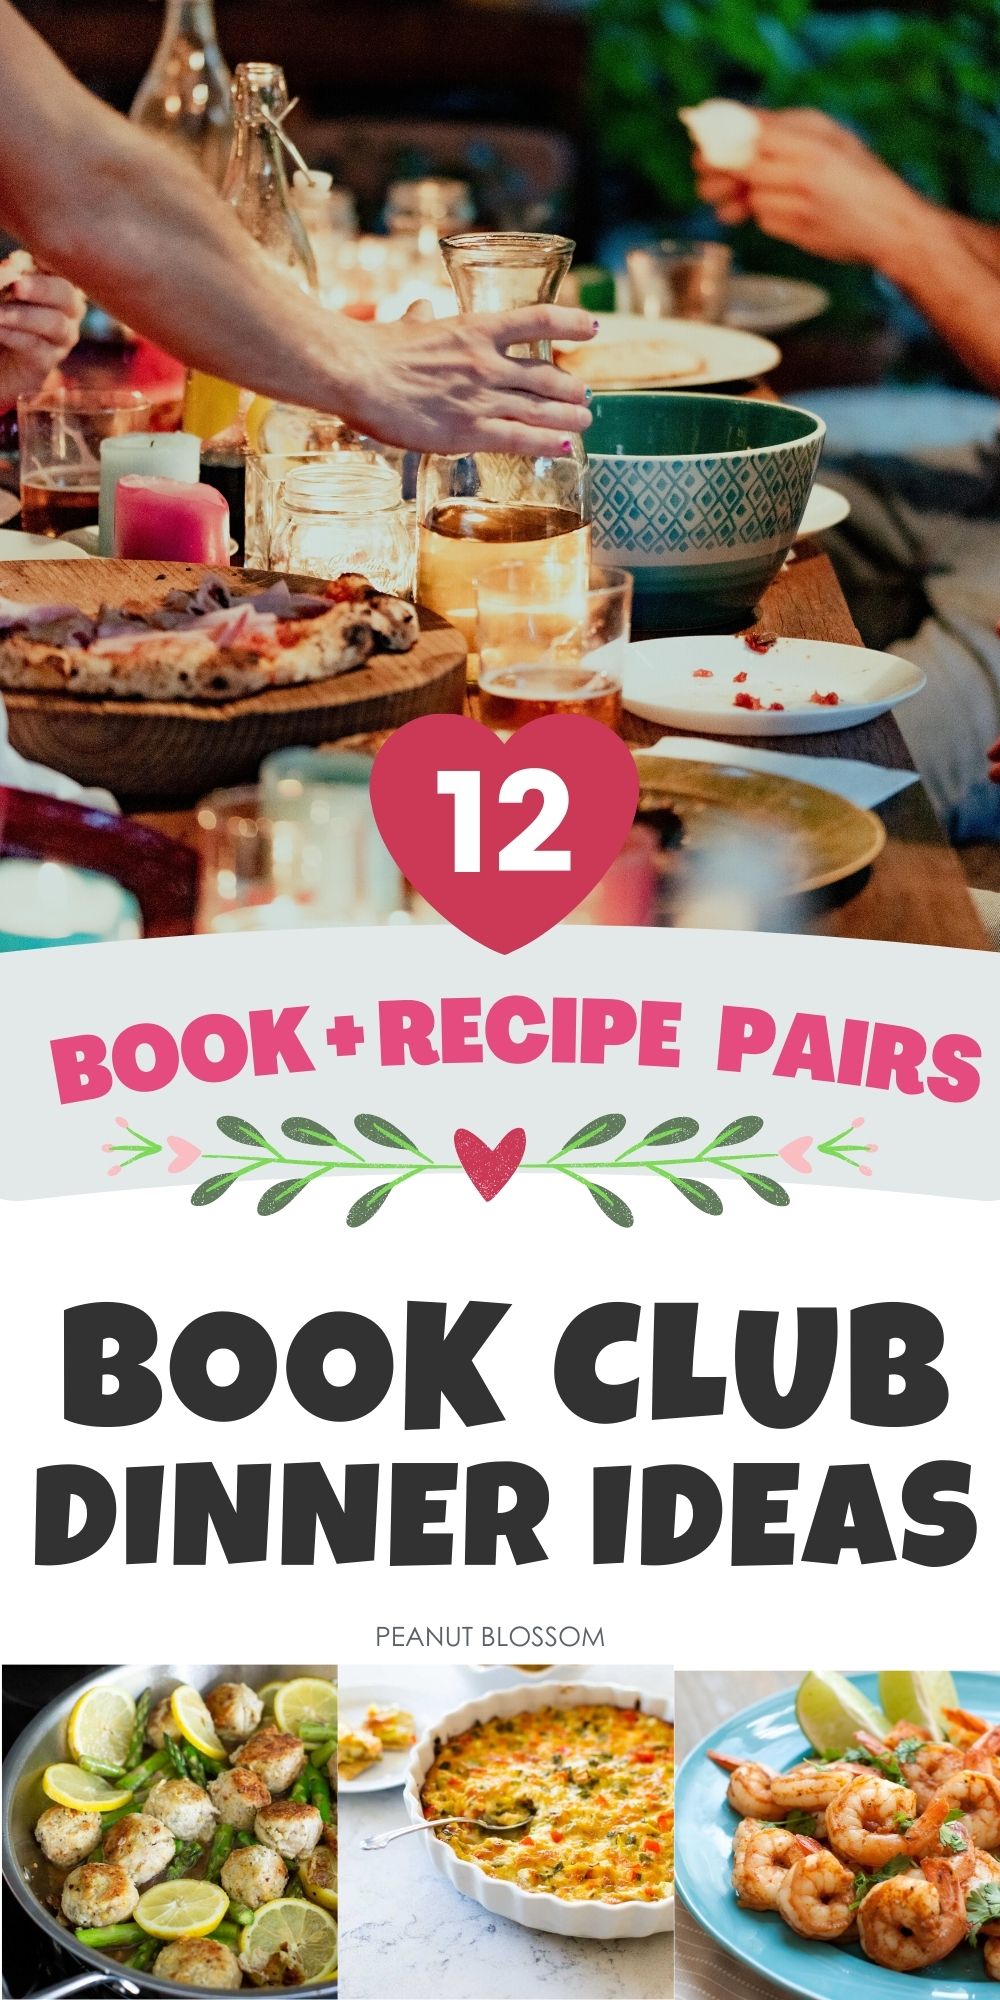 The photo collage shows a book club party on the top and several dinner ideas below.